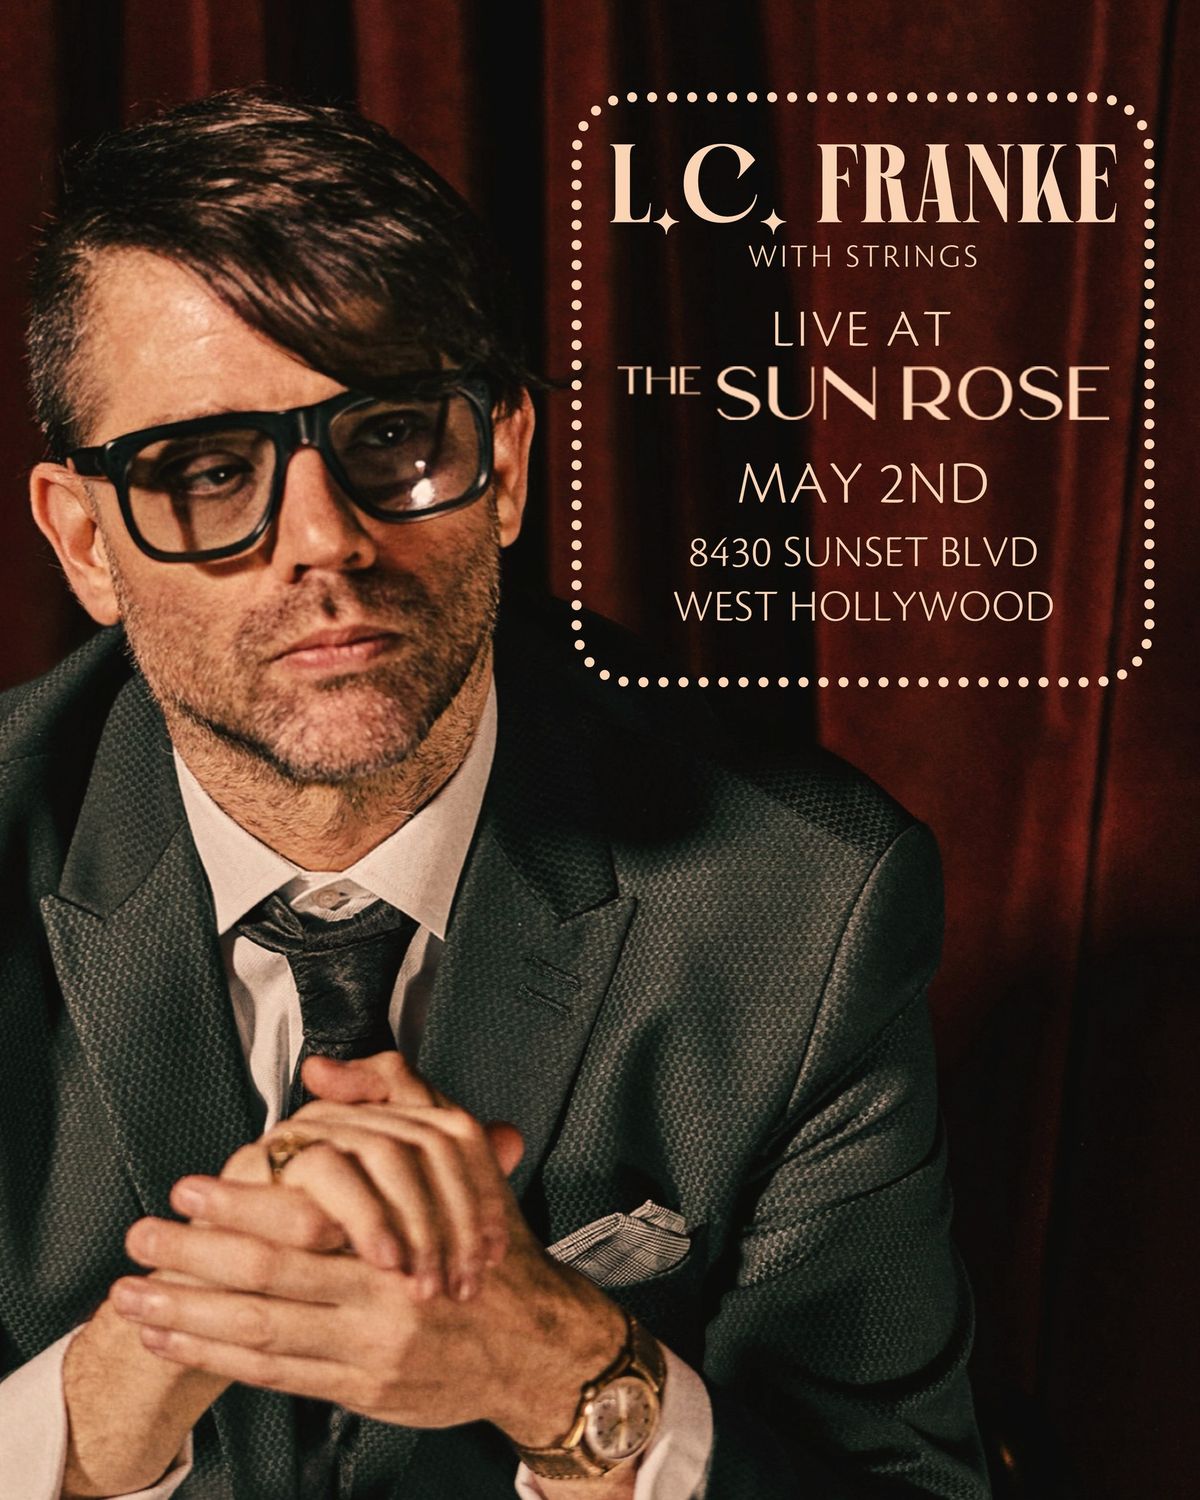 An evening with L.C. Franke at The Sun Rose in West Hollywood